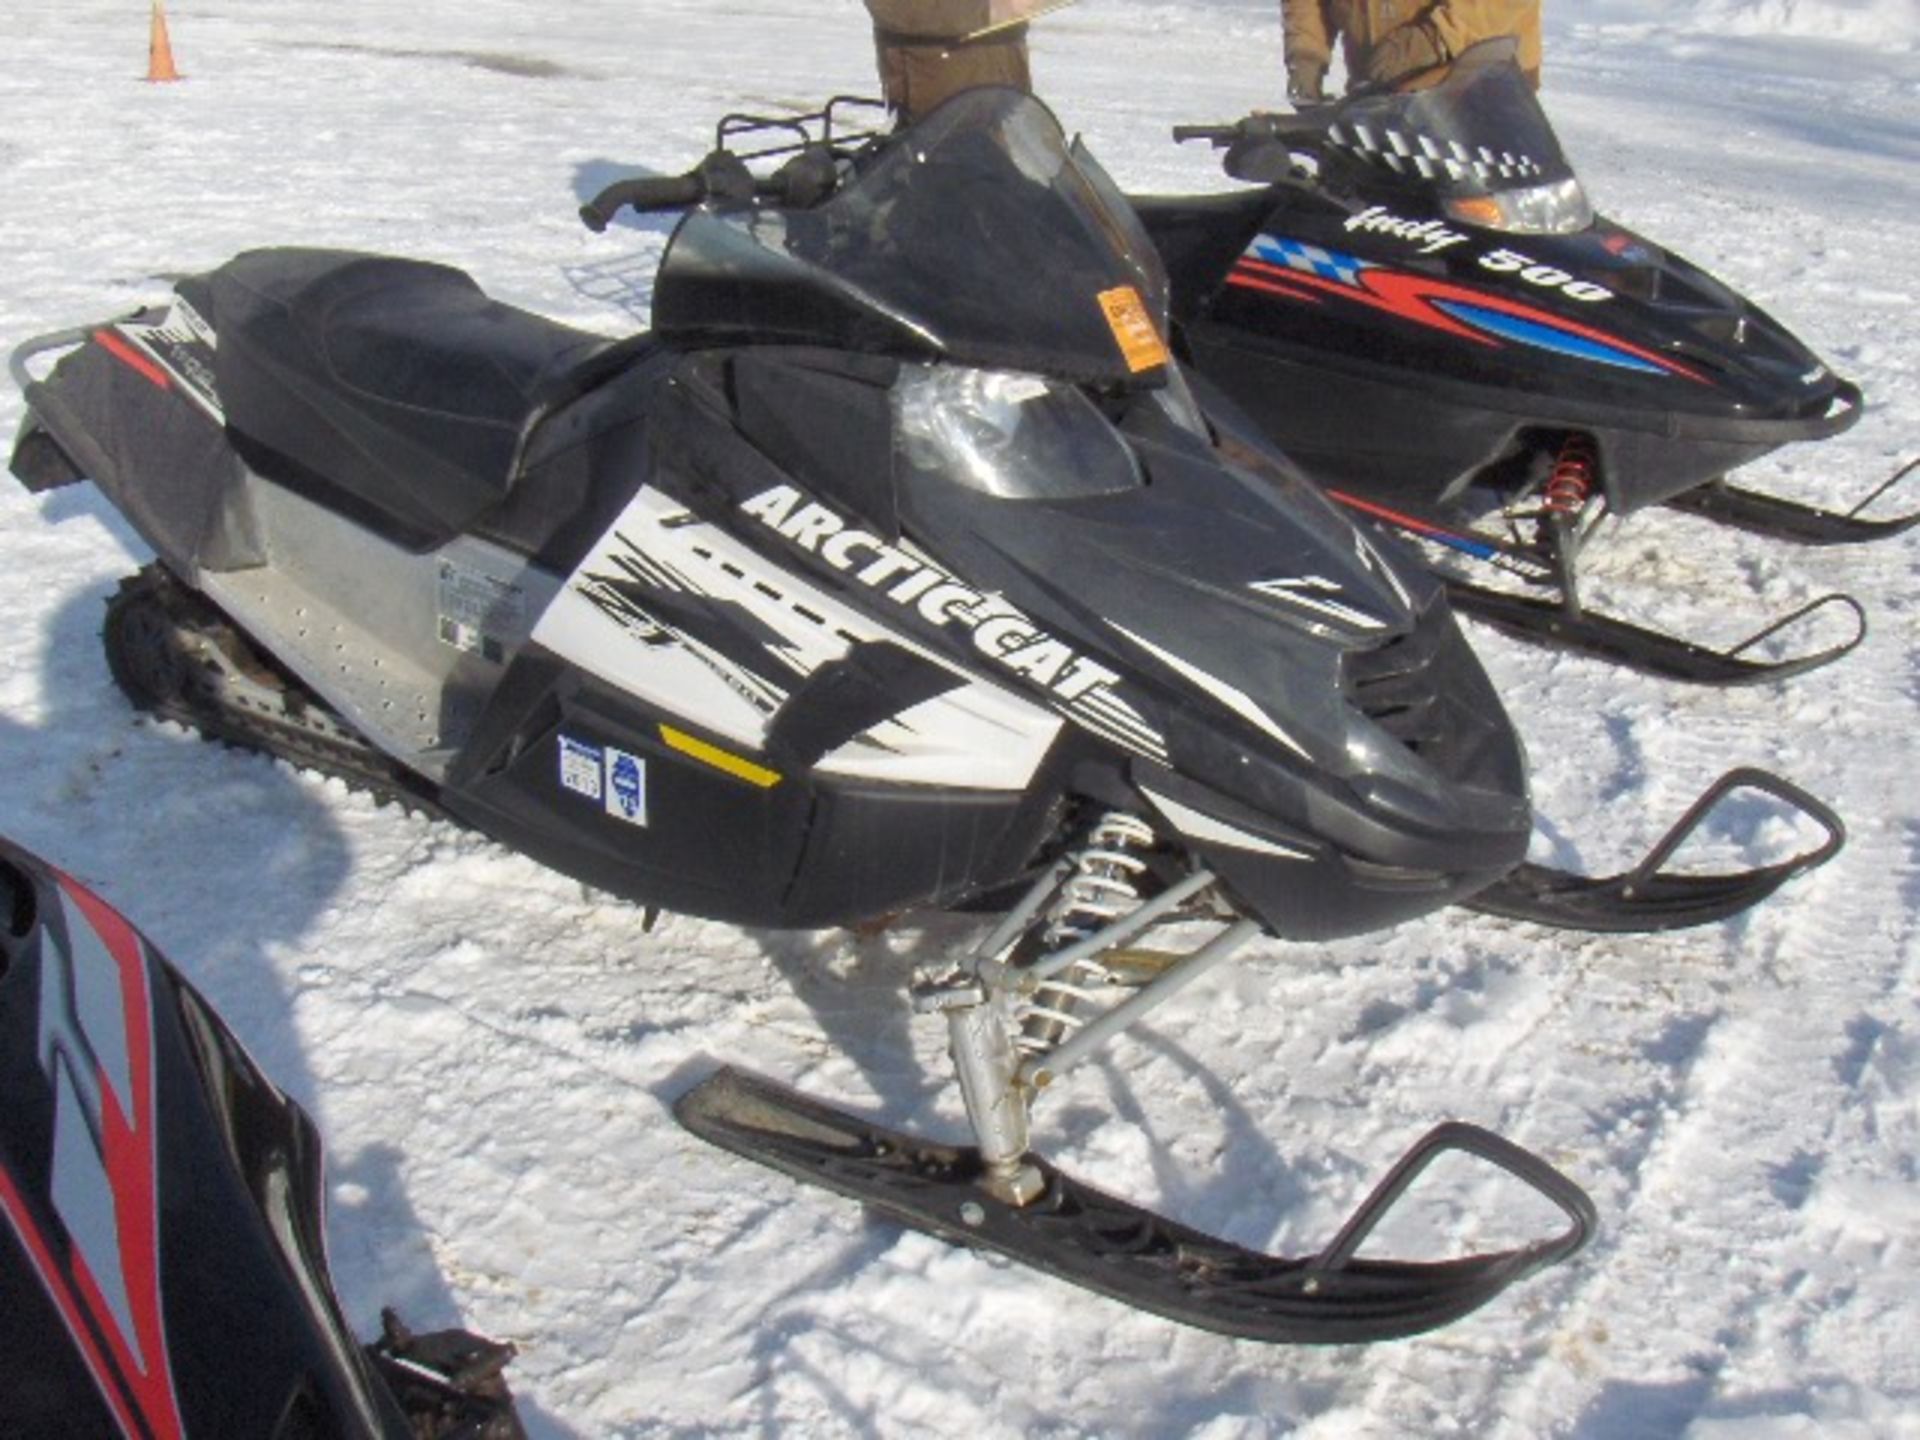 2009 ARCTIC CAT  1100 Z1 TURBO  4UF09SNW39T127067 snowmobile, electric start and reverse, sold - Image 2 of 2